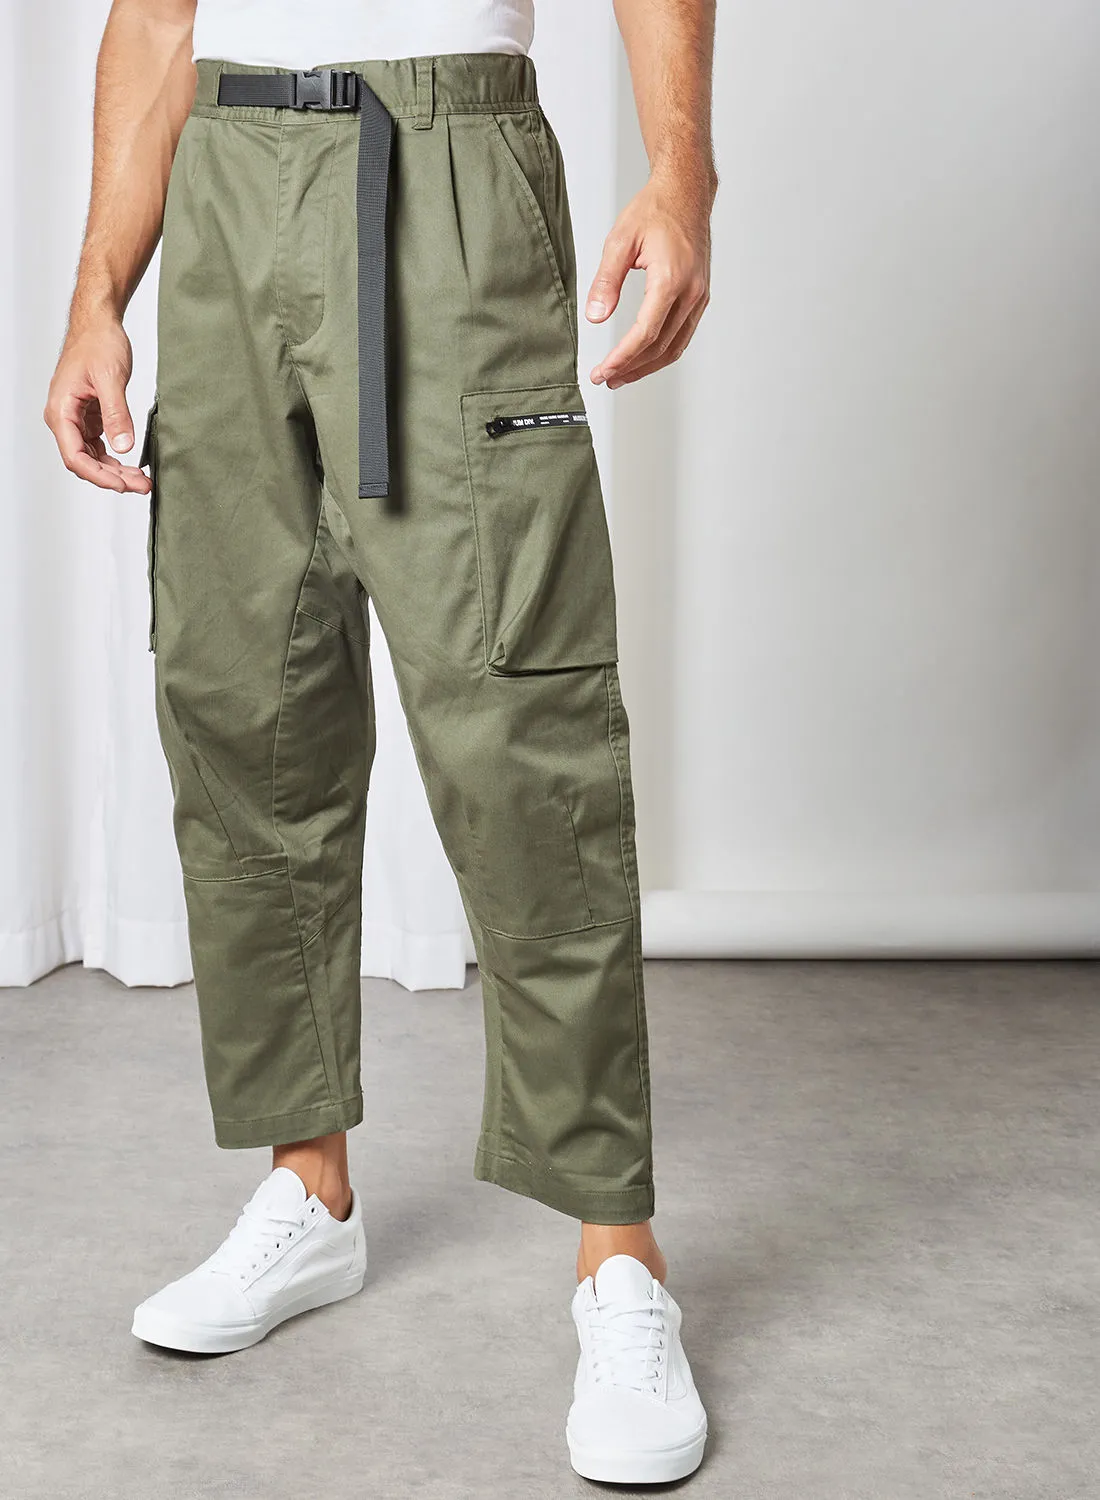 MUSIUM DIV. Woven Relaxed Fit Pants Khaki